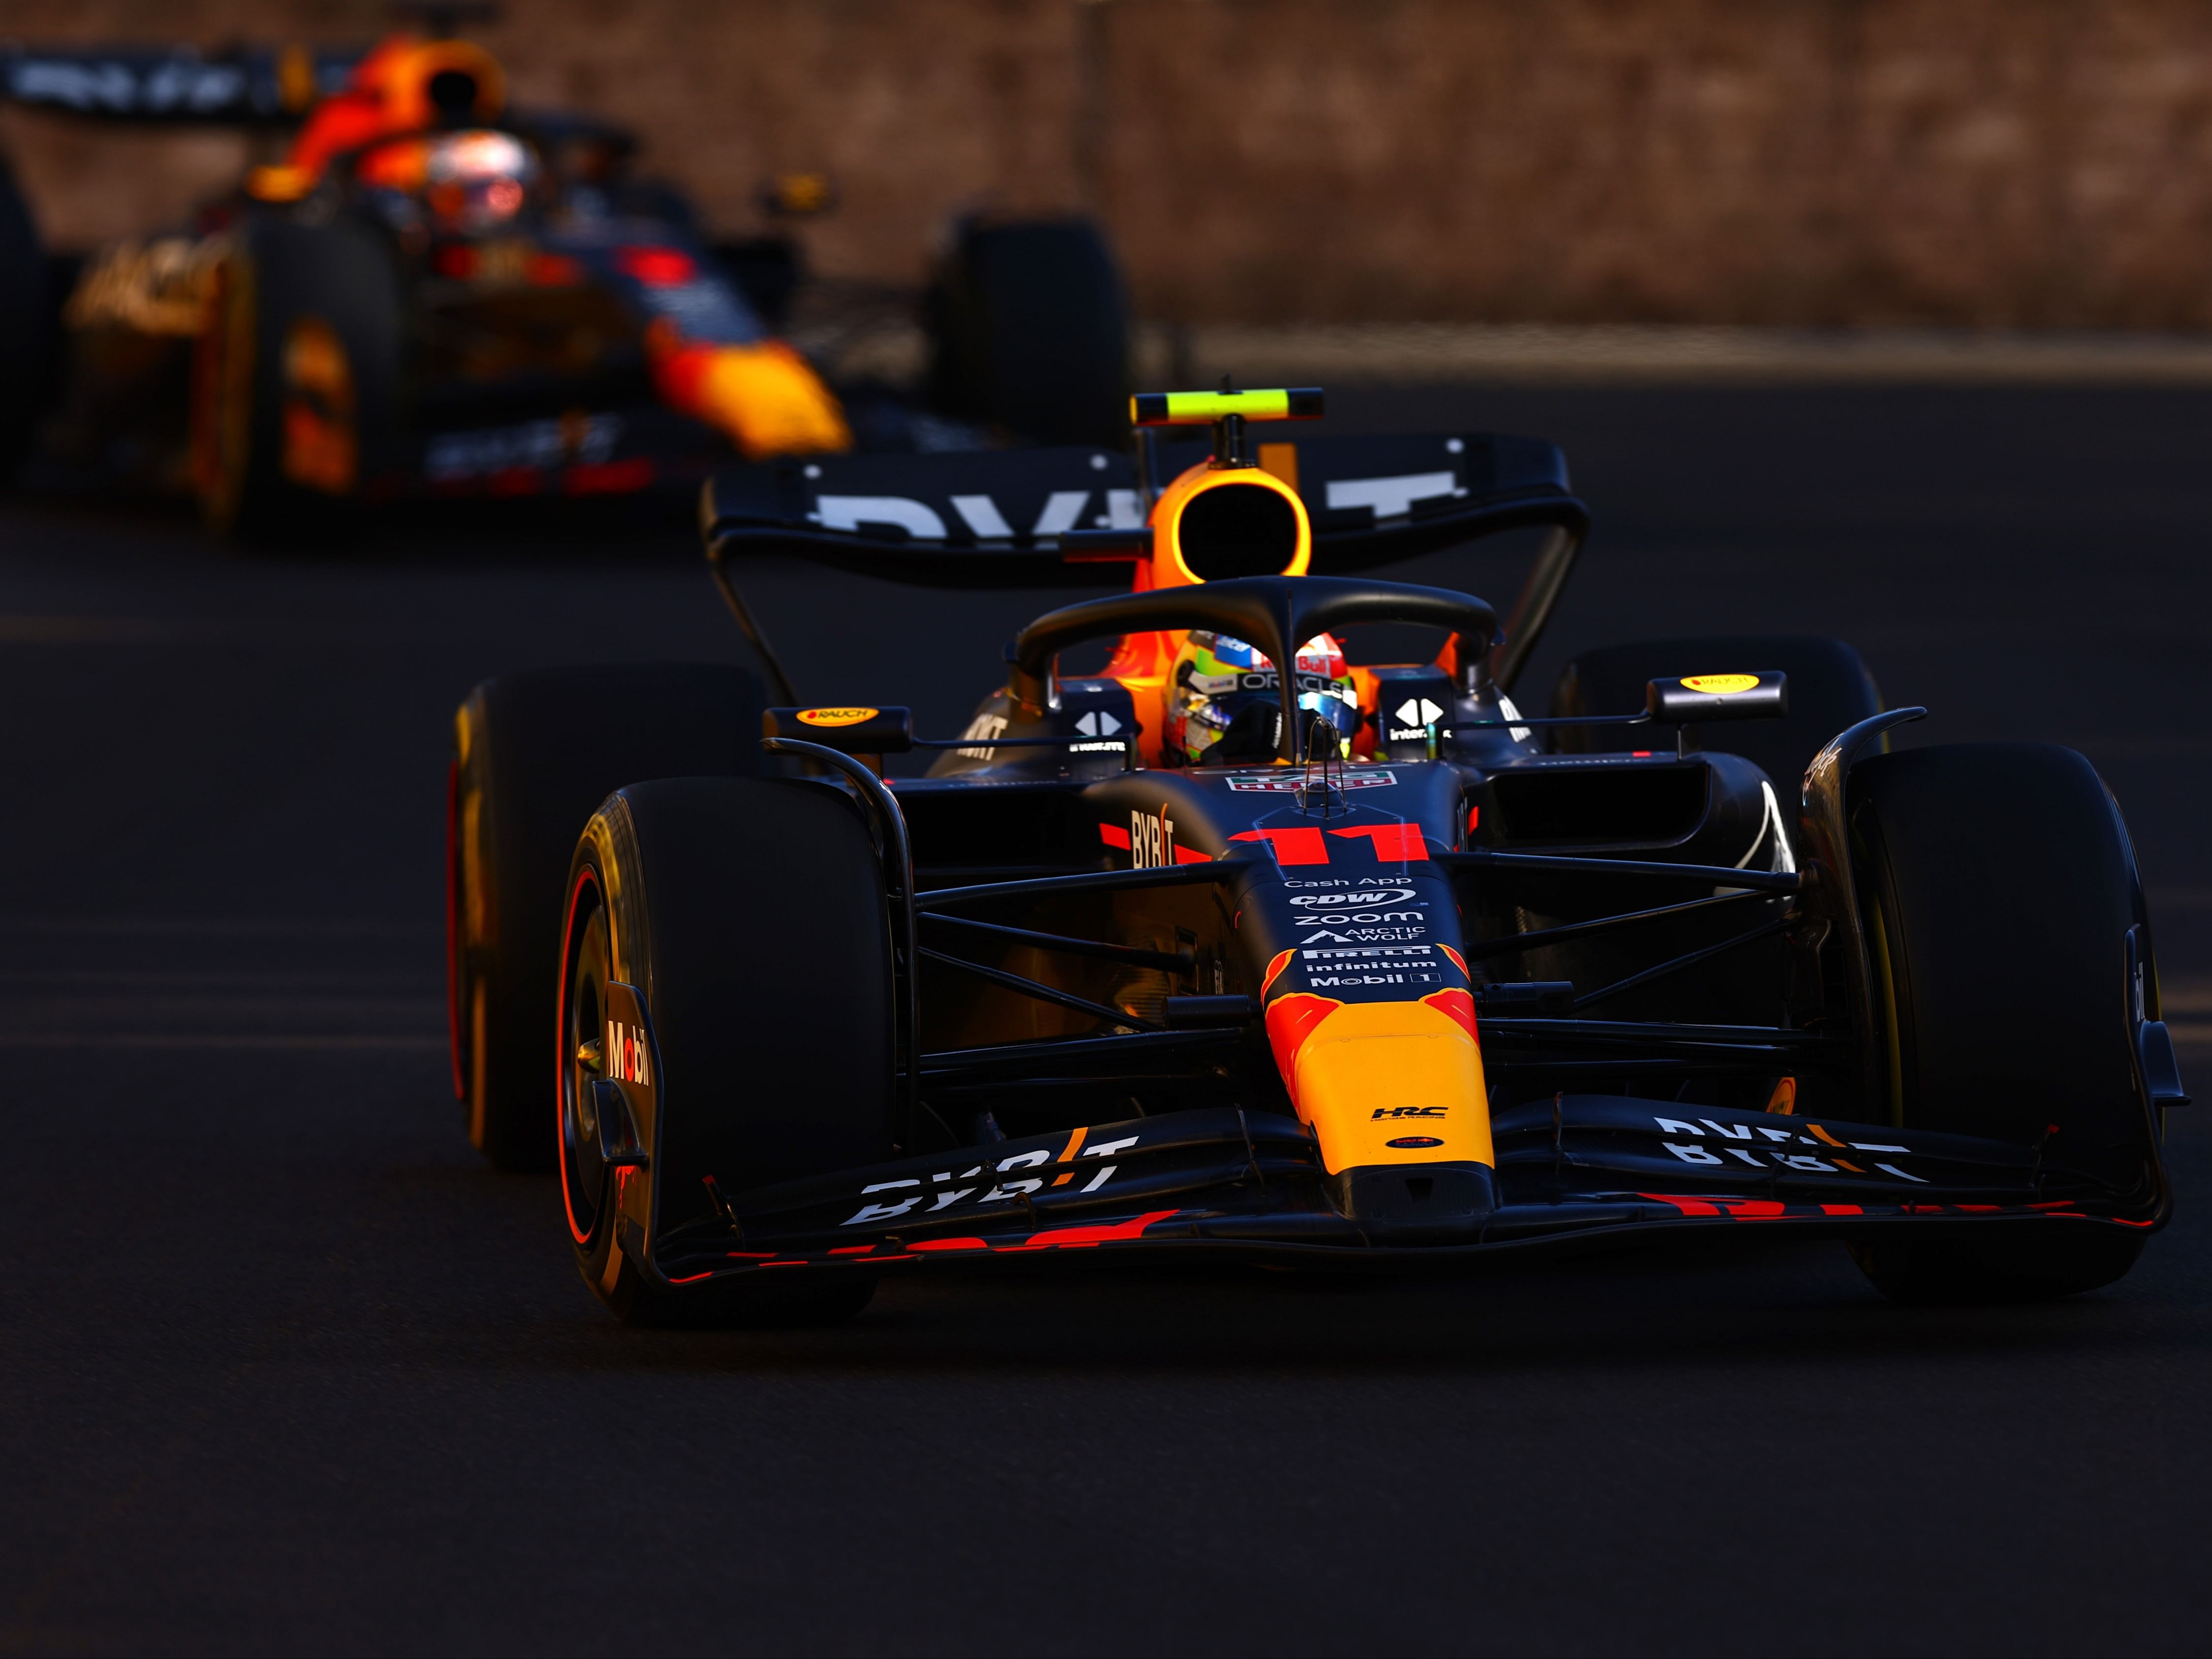 Sergio Perez (11) and Max Verstappen (1) during the Sprint Shootout/Sprint race ahead of the 2023 F1 Azerbaijan Grand Prix. (Photo by Alex Pantling/Getty Images)